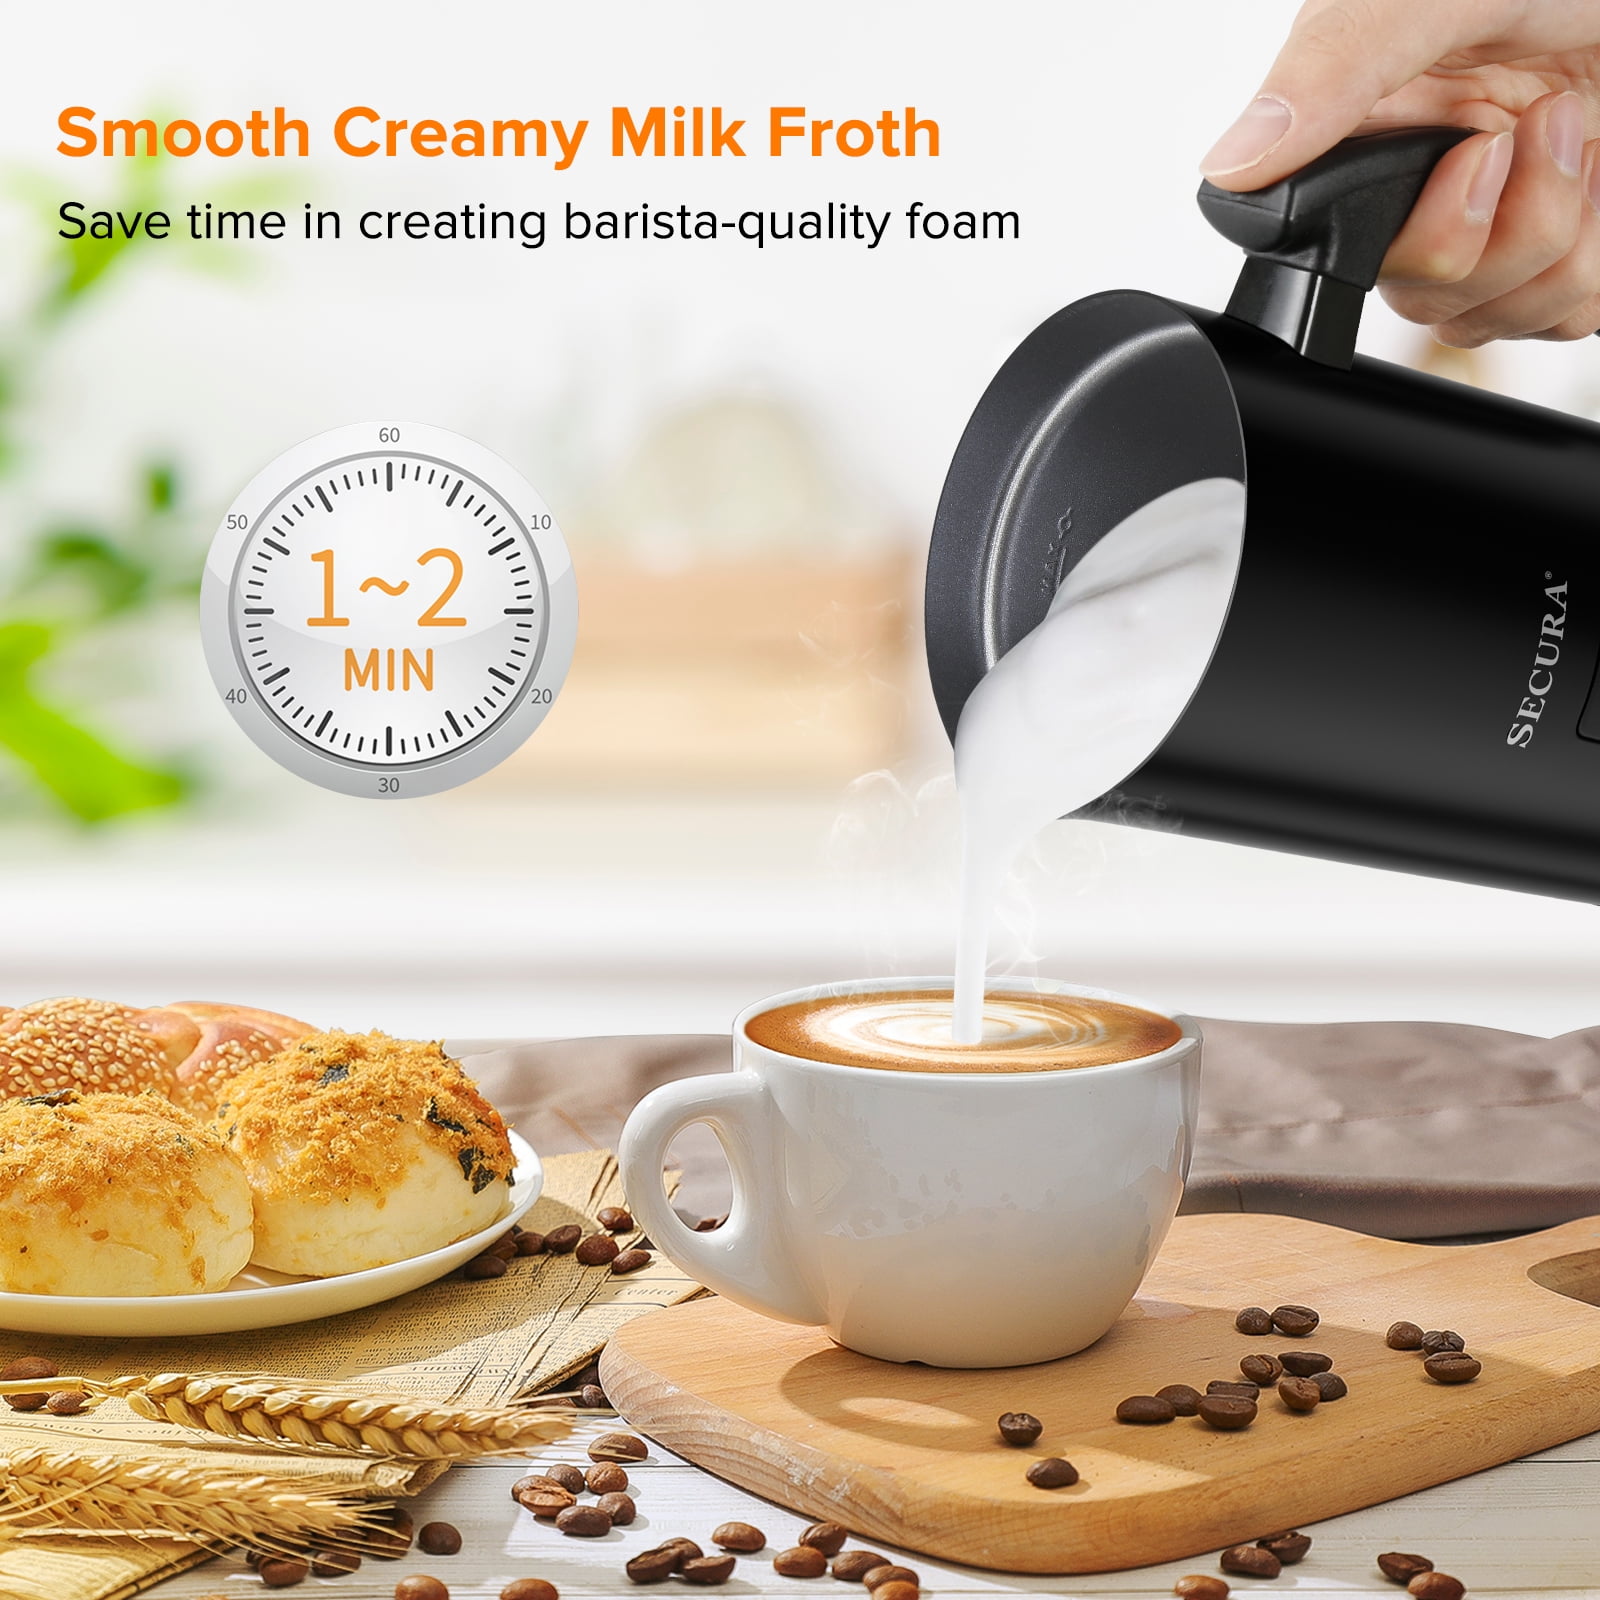 Secura Electric Milk Frother Automatic Milk Steamer Warm or Cold Foam Maker for Coffee Cappuccino Latte Stainless Steel Milk Warmer with Strix